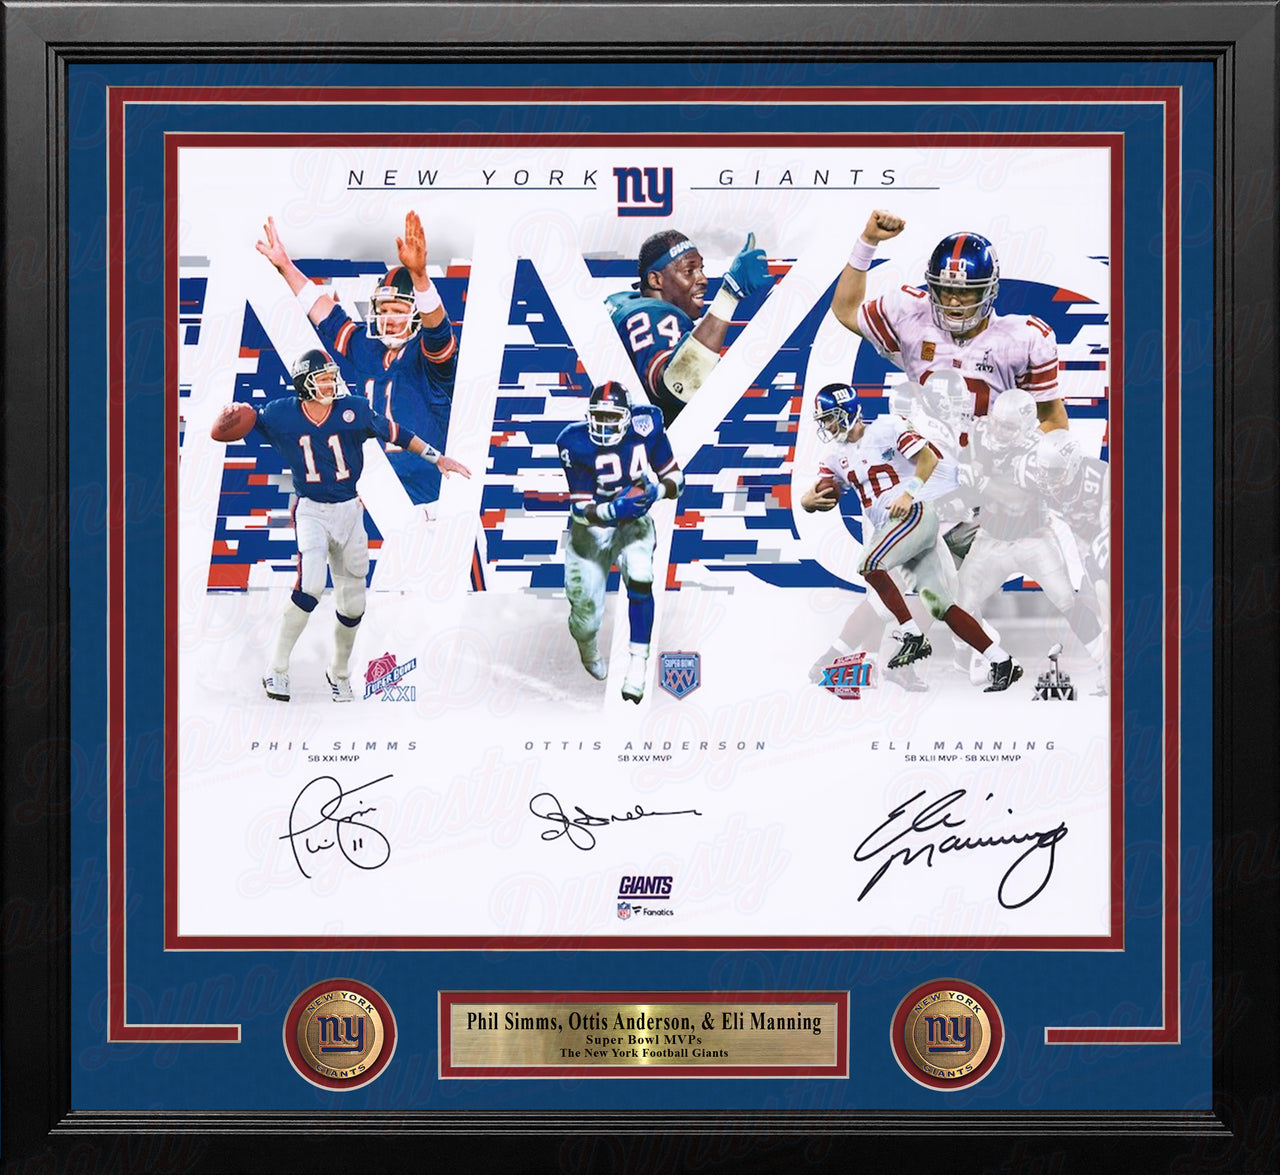 Phil Simms, Ottis Anderson, & Eli Manning Super Bowl MVP NY Giants Autographed 16x20 Framed Photo